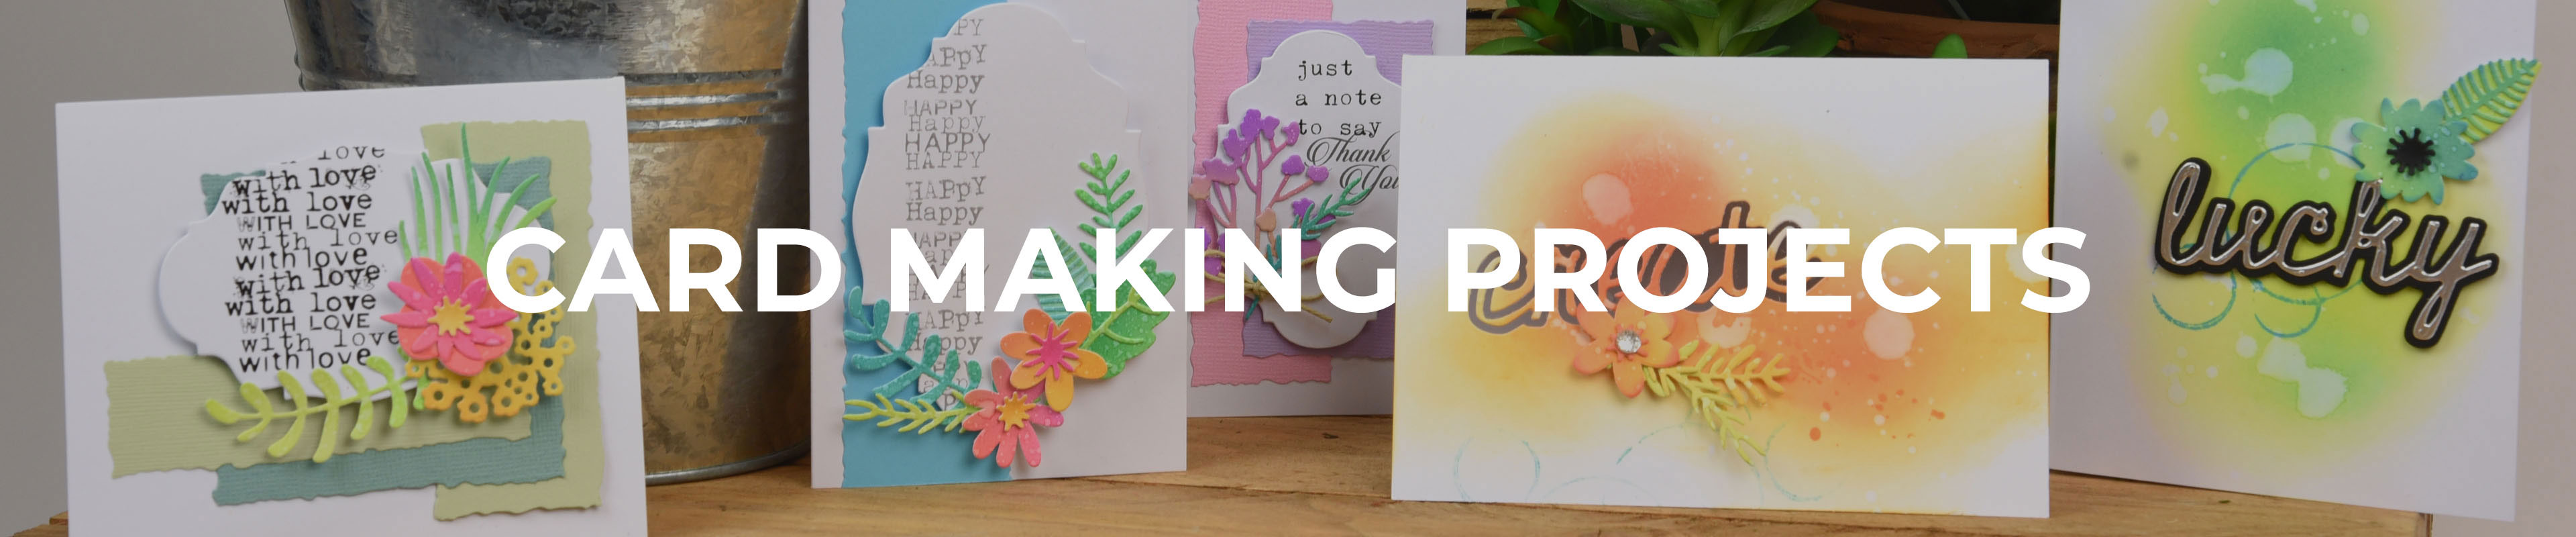 Card Making Projects